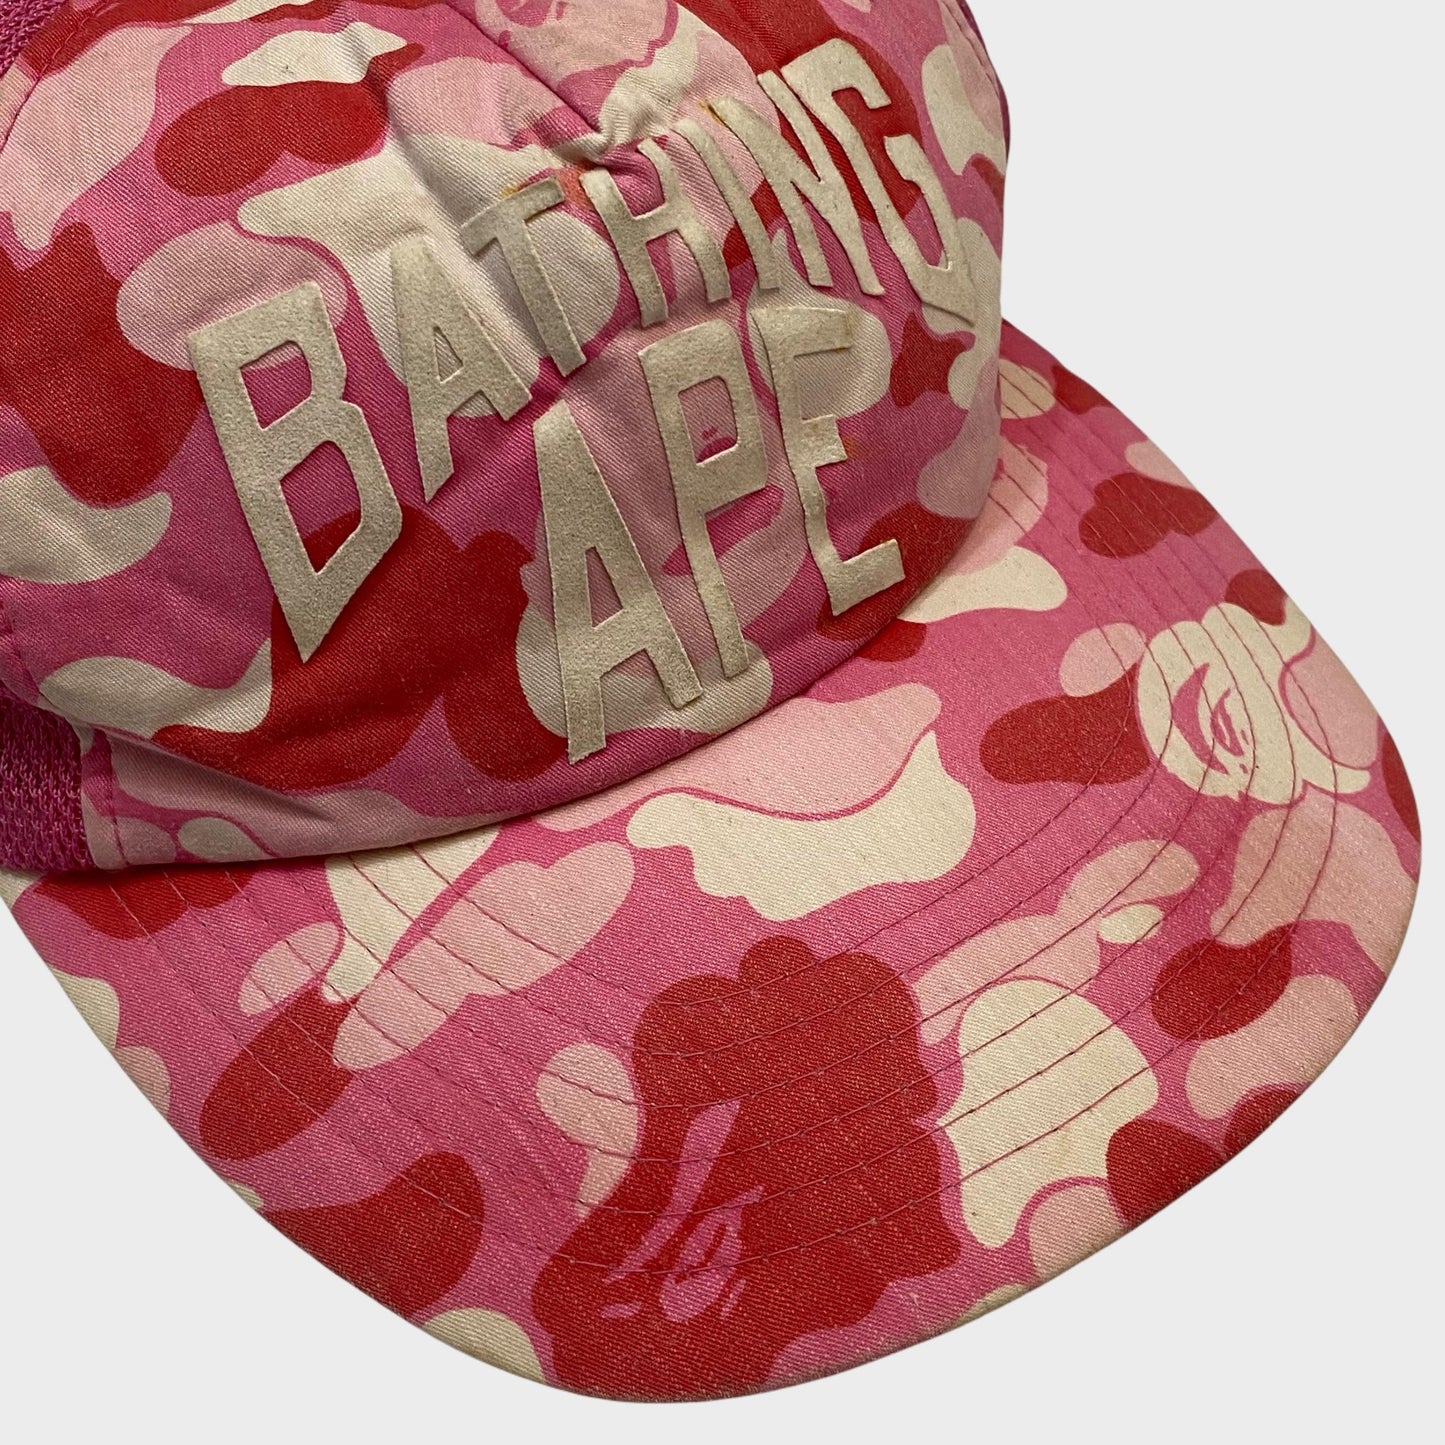 Bape OG ‘06 Pink Camo Trucker Cap - One Size - Known Source